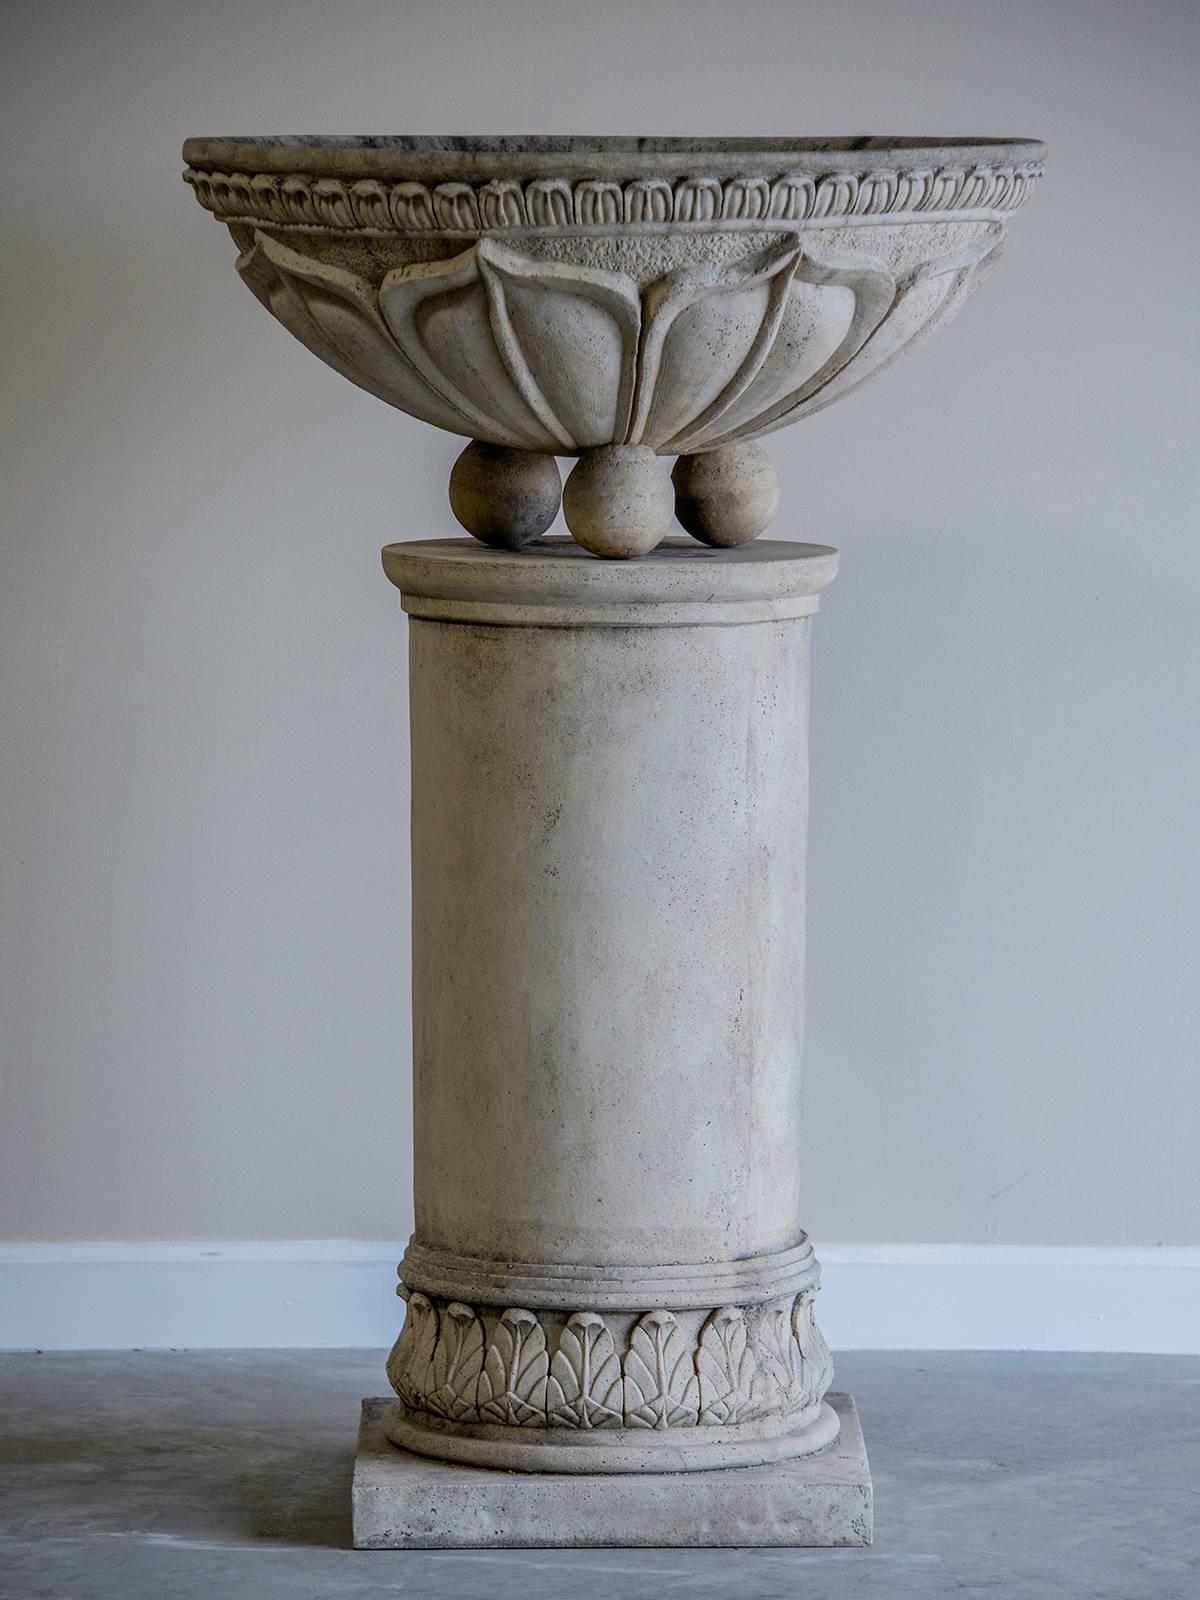 20th Century Pair of Vintage French Circular Basins Atop Columns, Relief Decoration